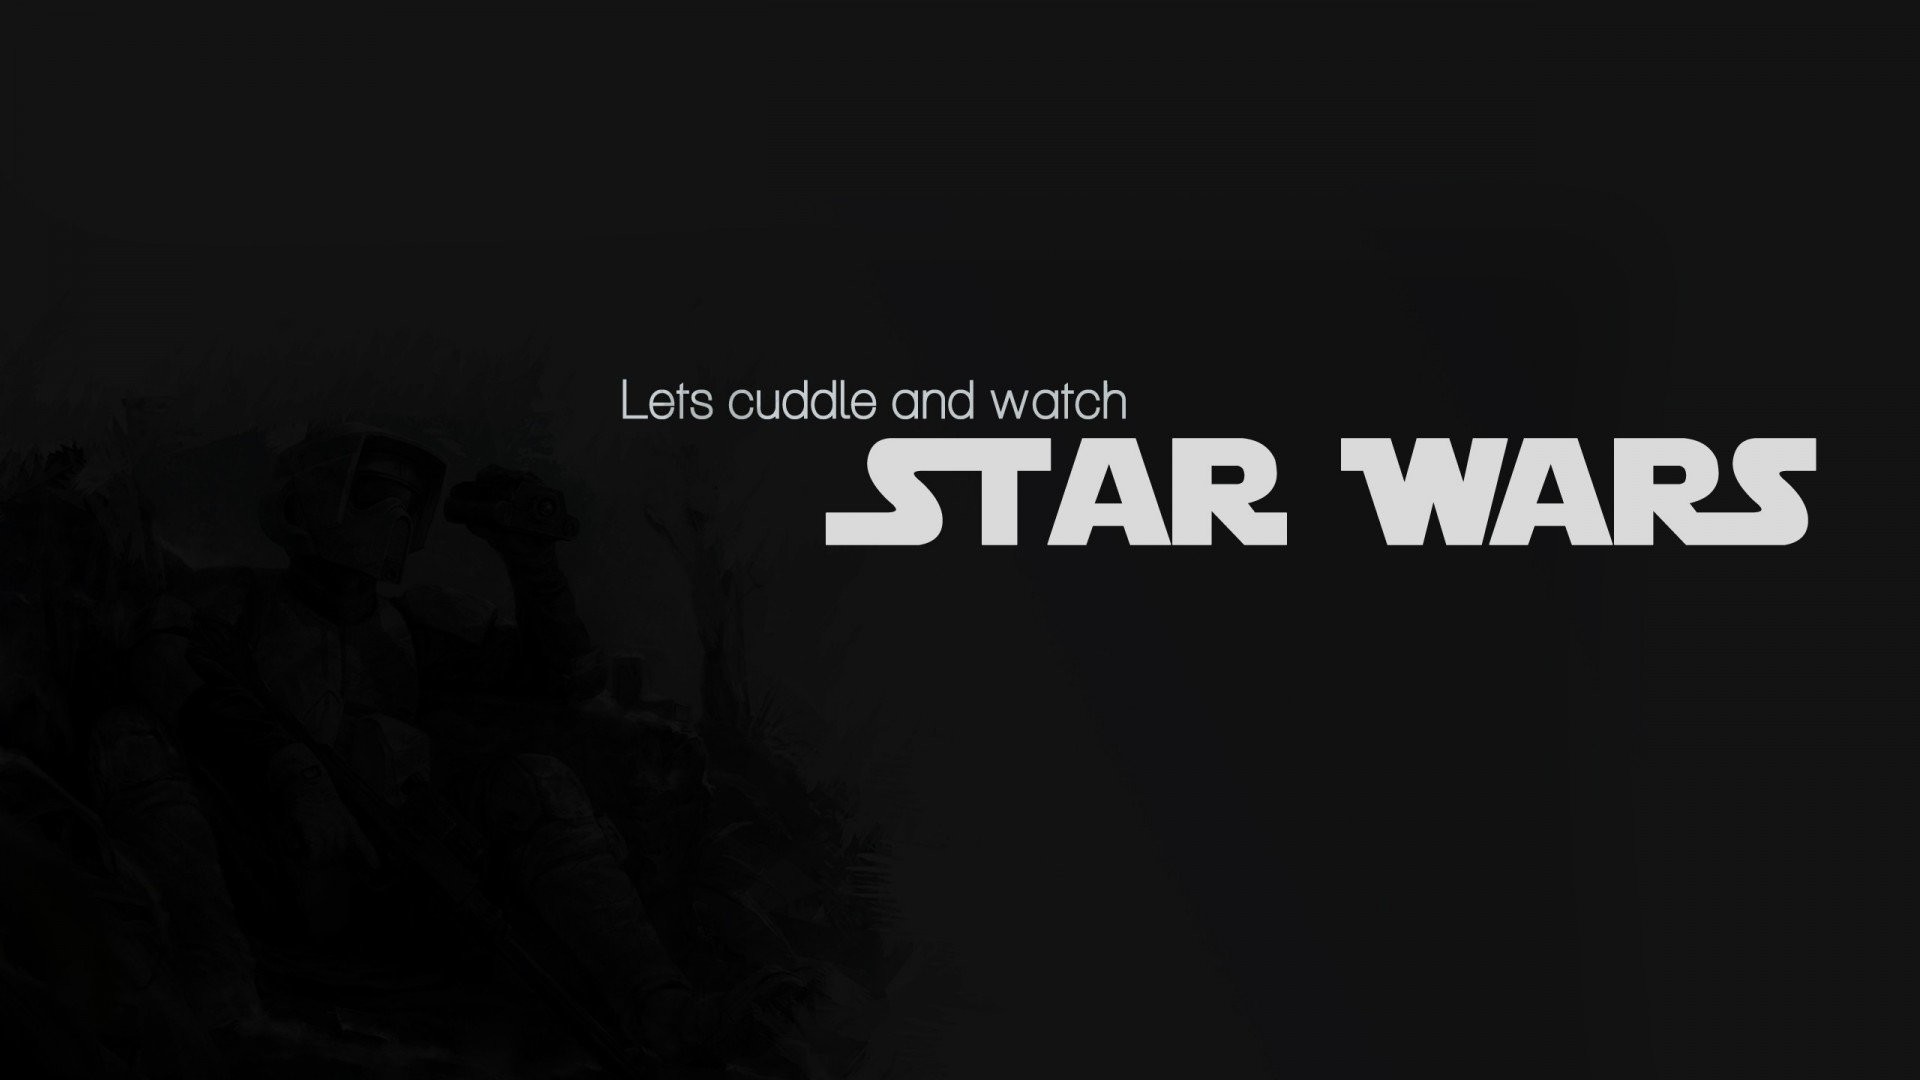 Funny Star Wars Quotes Data-src /w/full/7/8/7/143723 - Star Wars Quotes  Black - 1920x1080 Wallpaper 